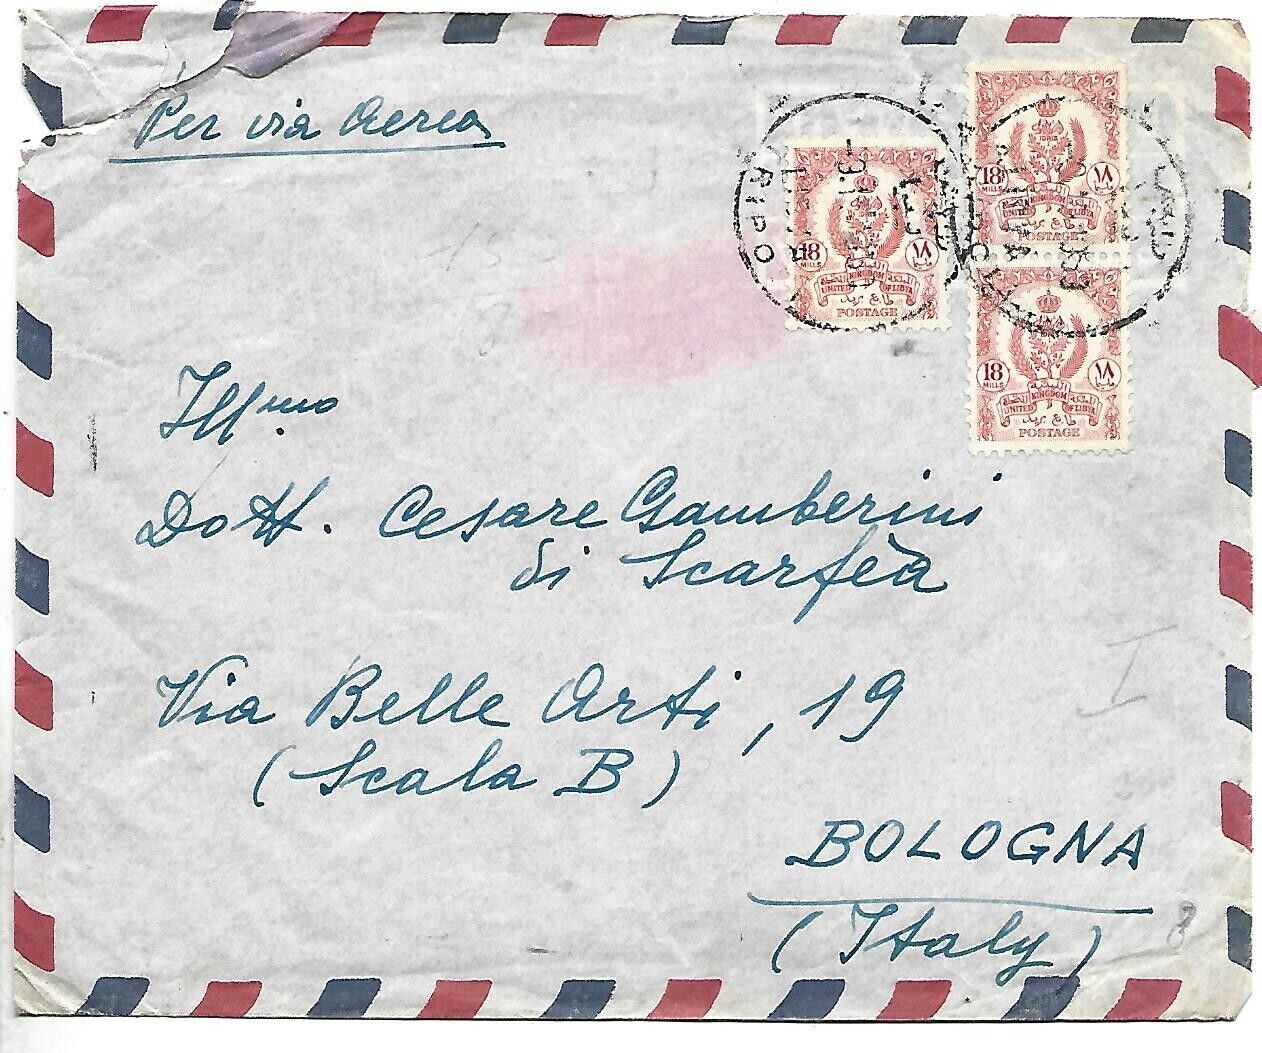 1950 United Kingdom Of Libya Air Mail Cover From Tripoli To Italy